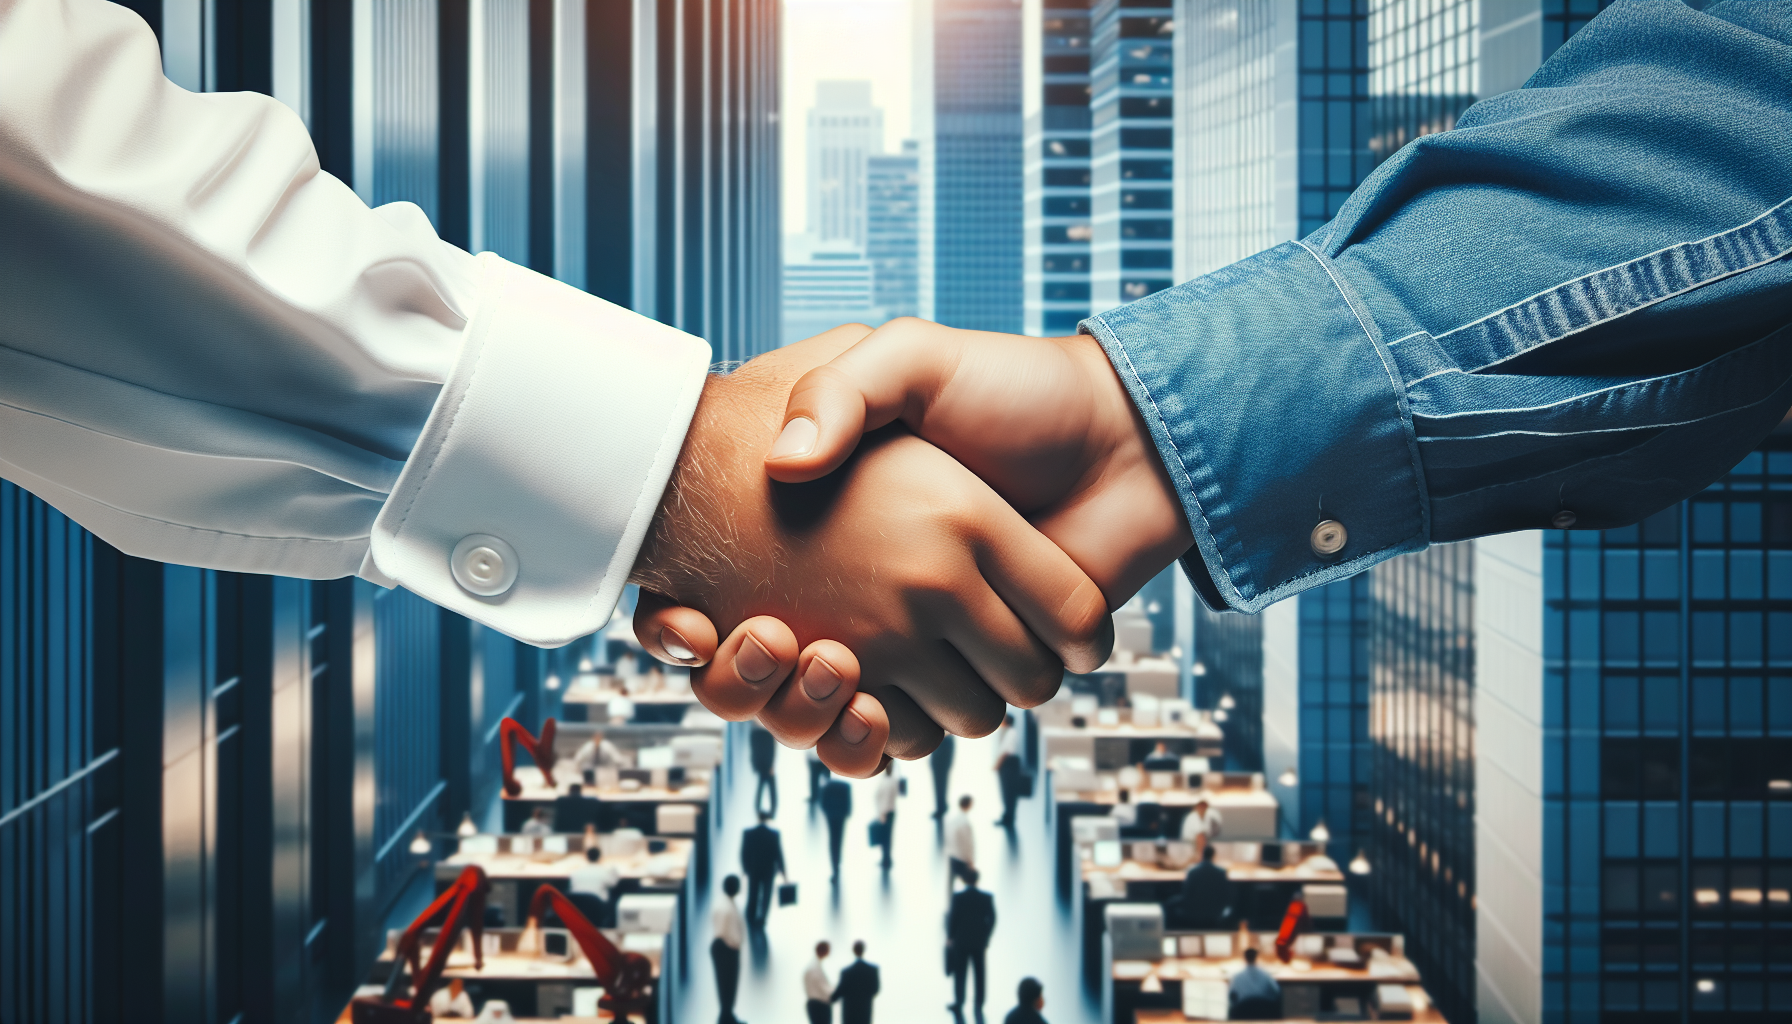 A handshake symbolizing employment procedures and expectations